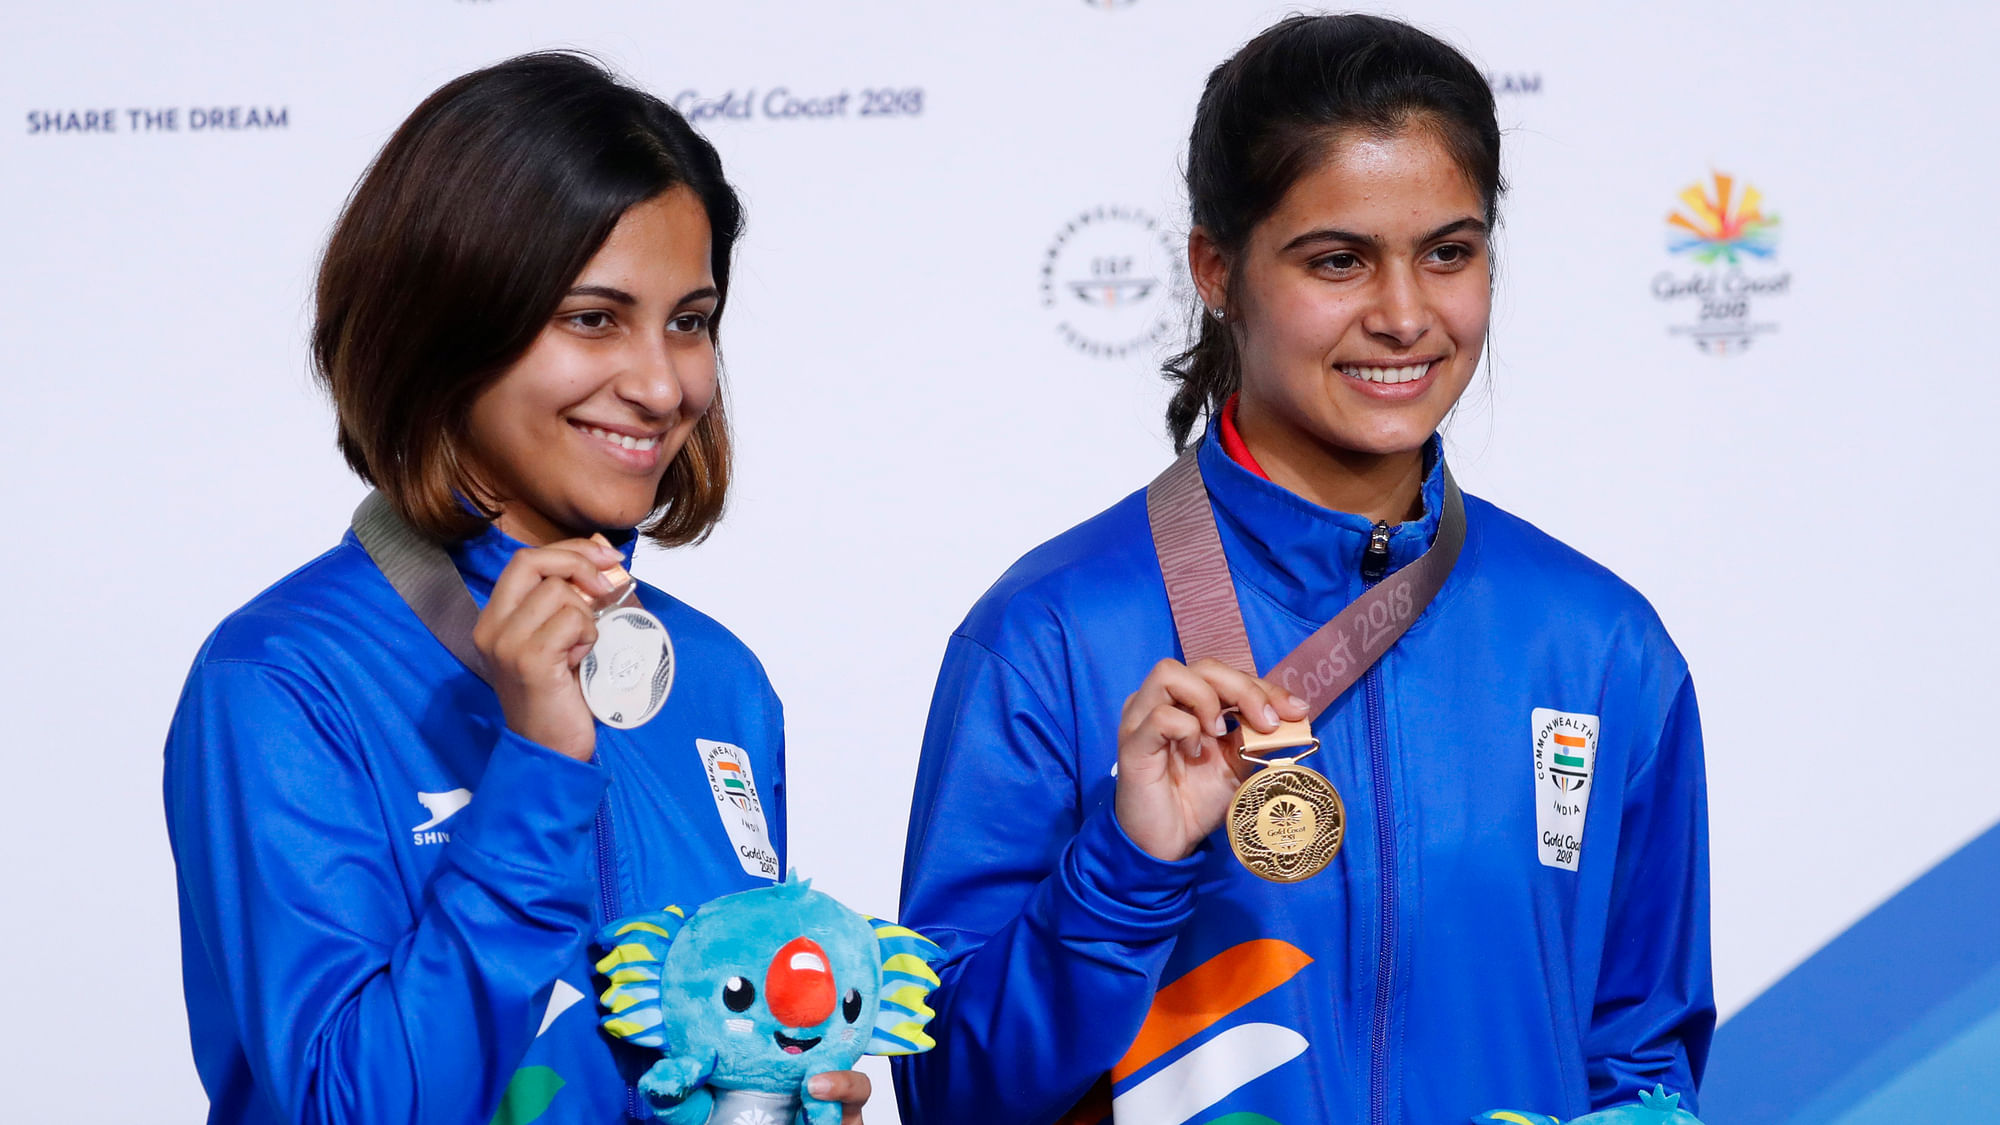 Manu Bhaker had beaten Heena Sidhu for the gold medal at the 2018 Commonwealth Games.